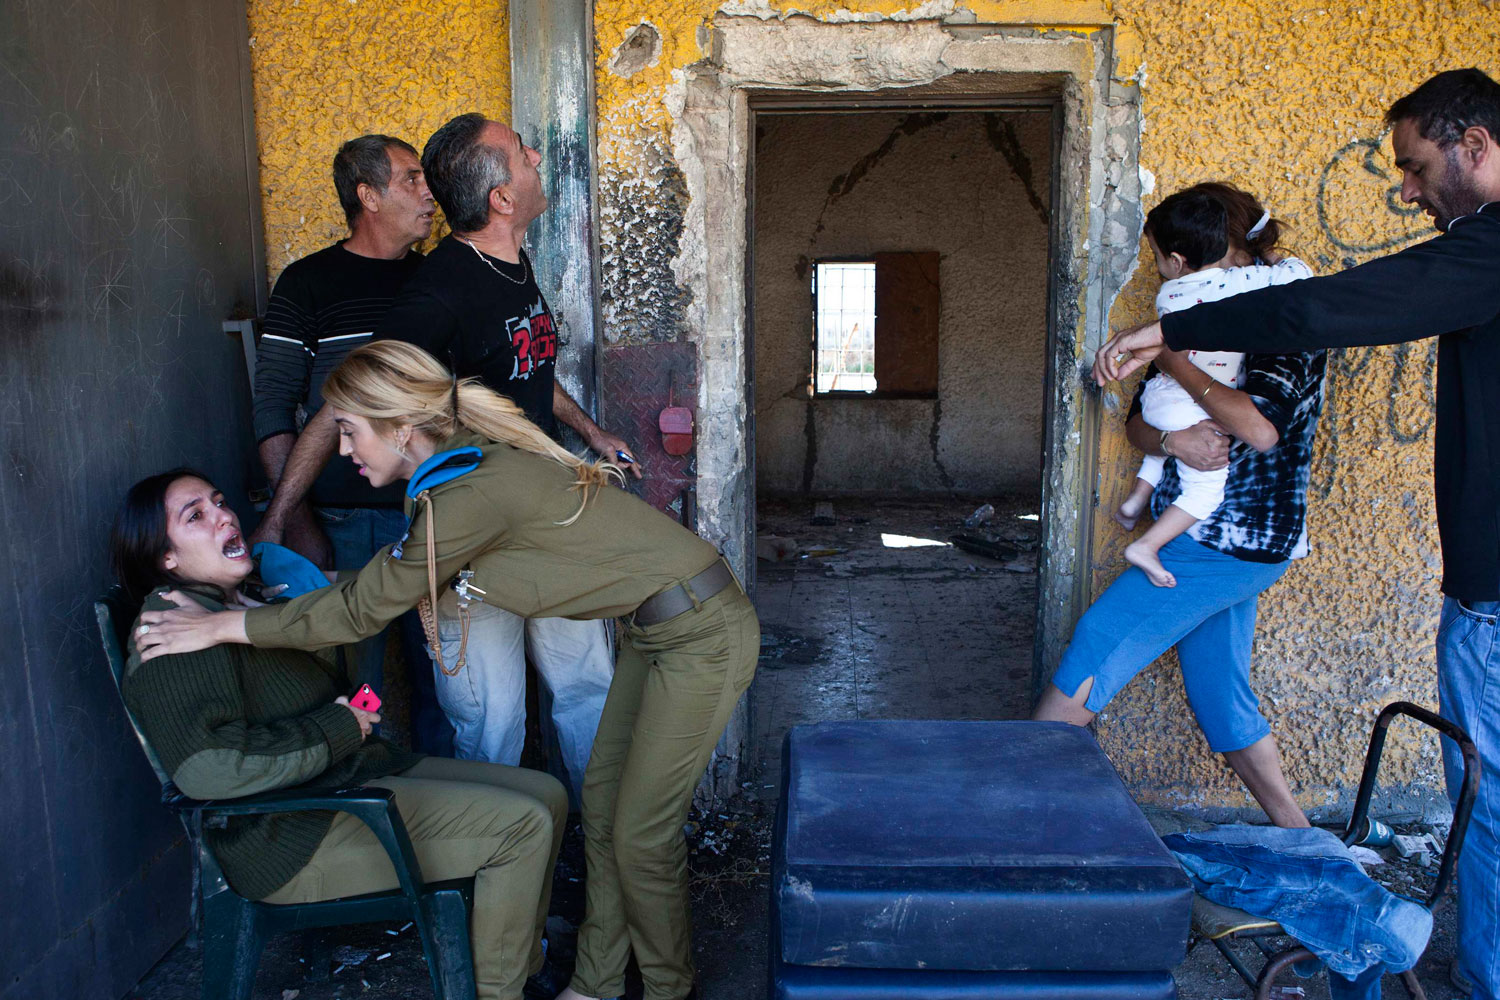 Image: Nov. 15, 2012. Israelis react and run for cover as a siren sounds a warning of incoming rockets in the southern town of Kiryat Malachi.